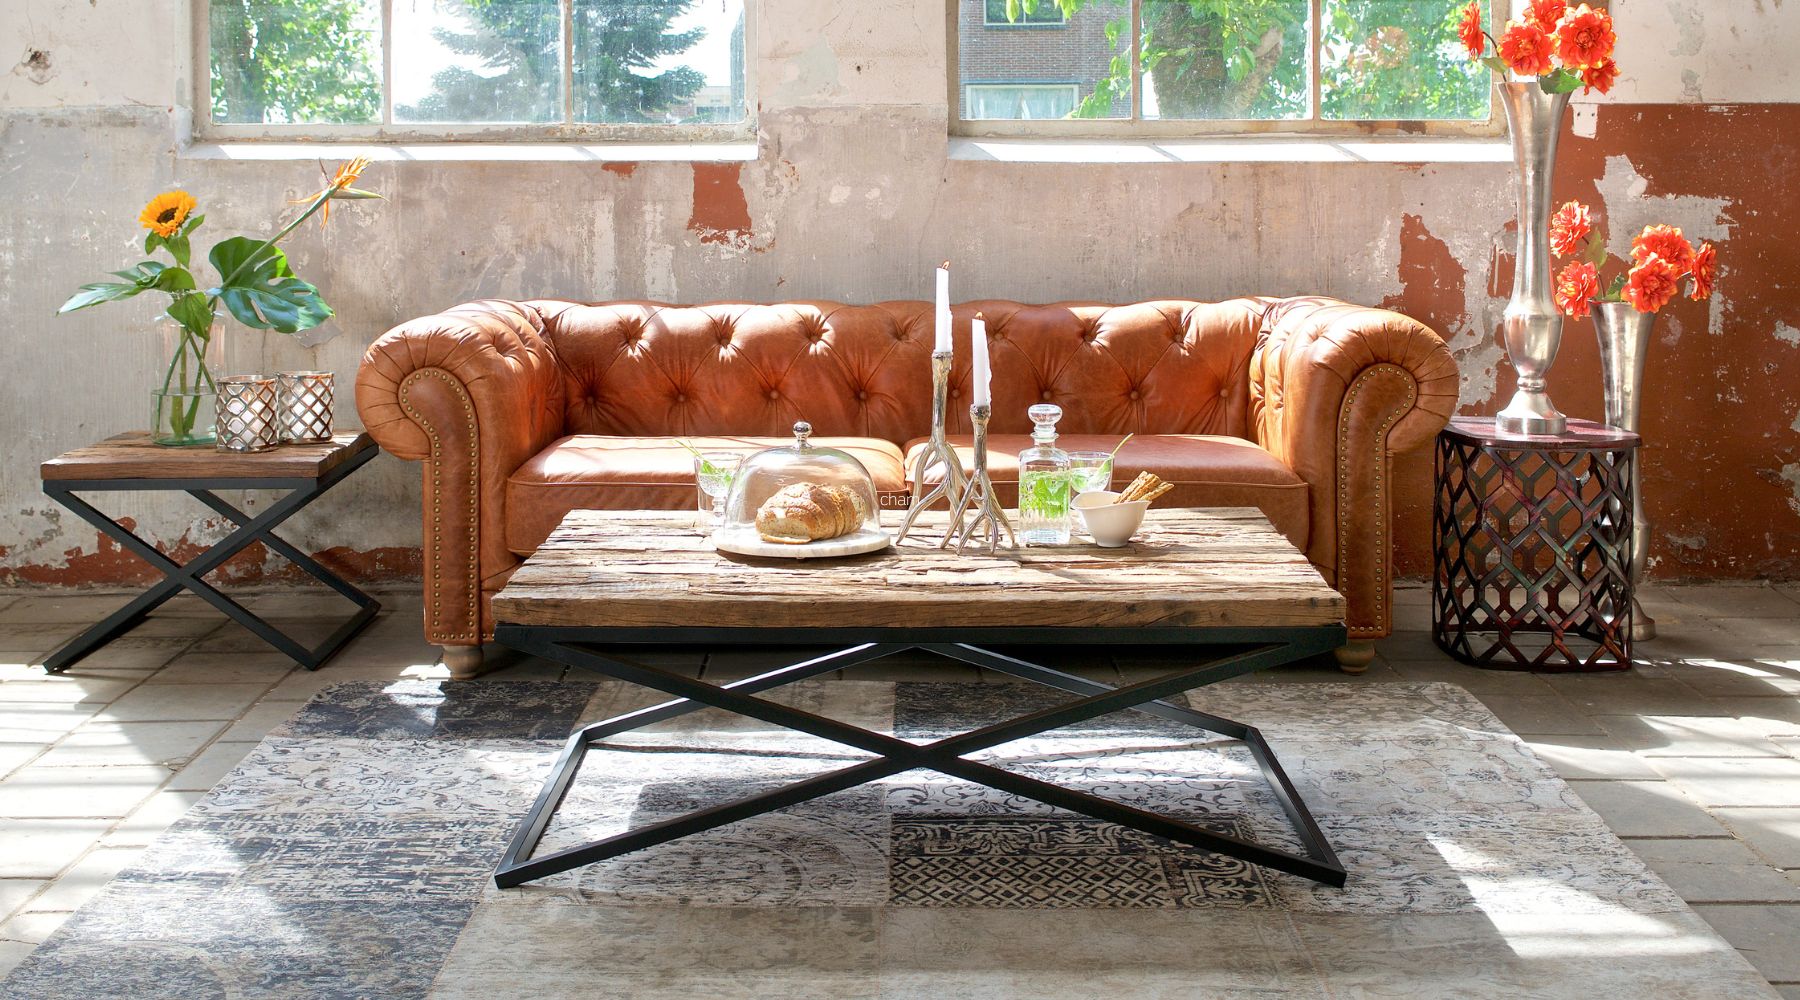 industrial coffee table with brown leather sofa